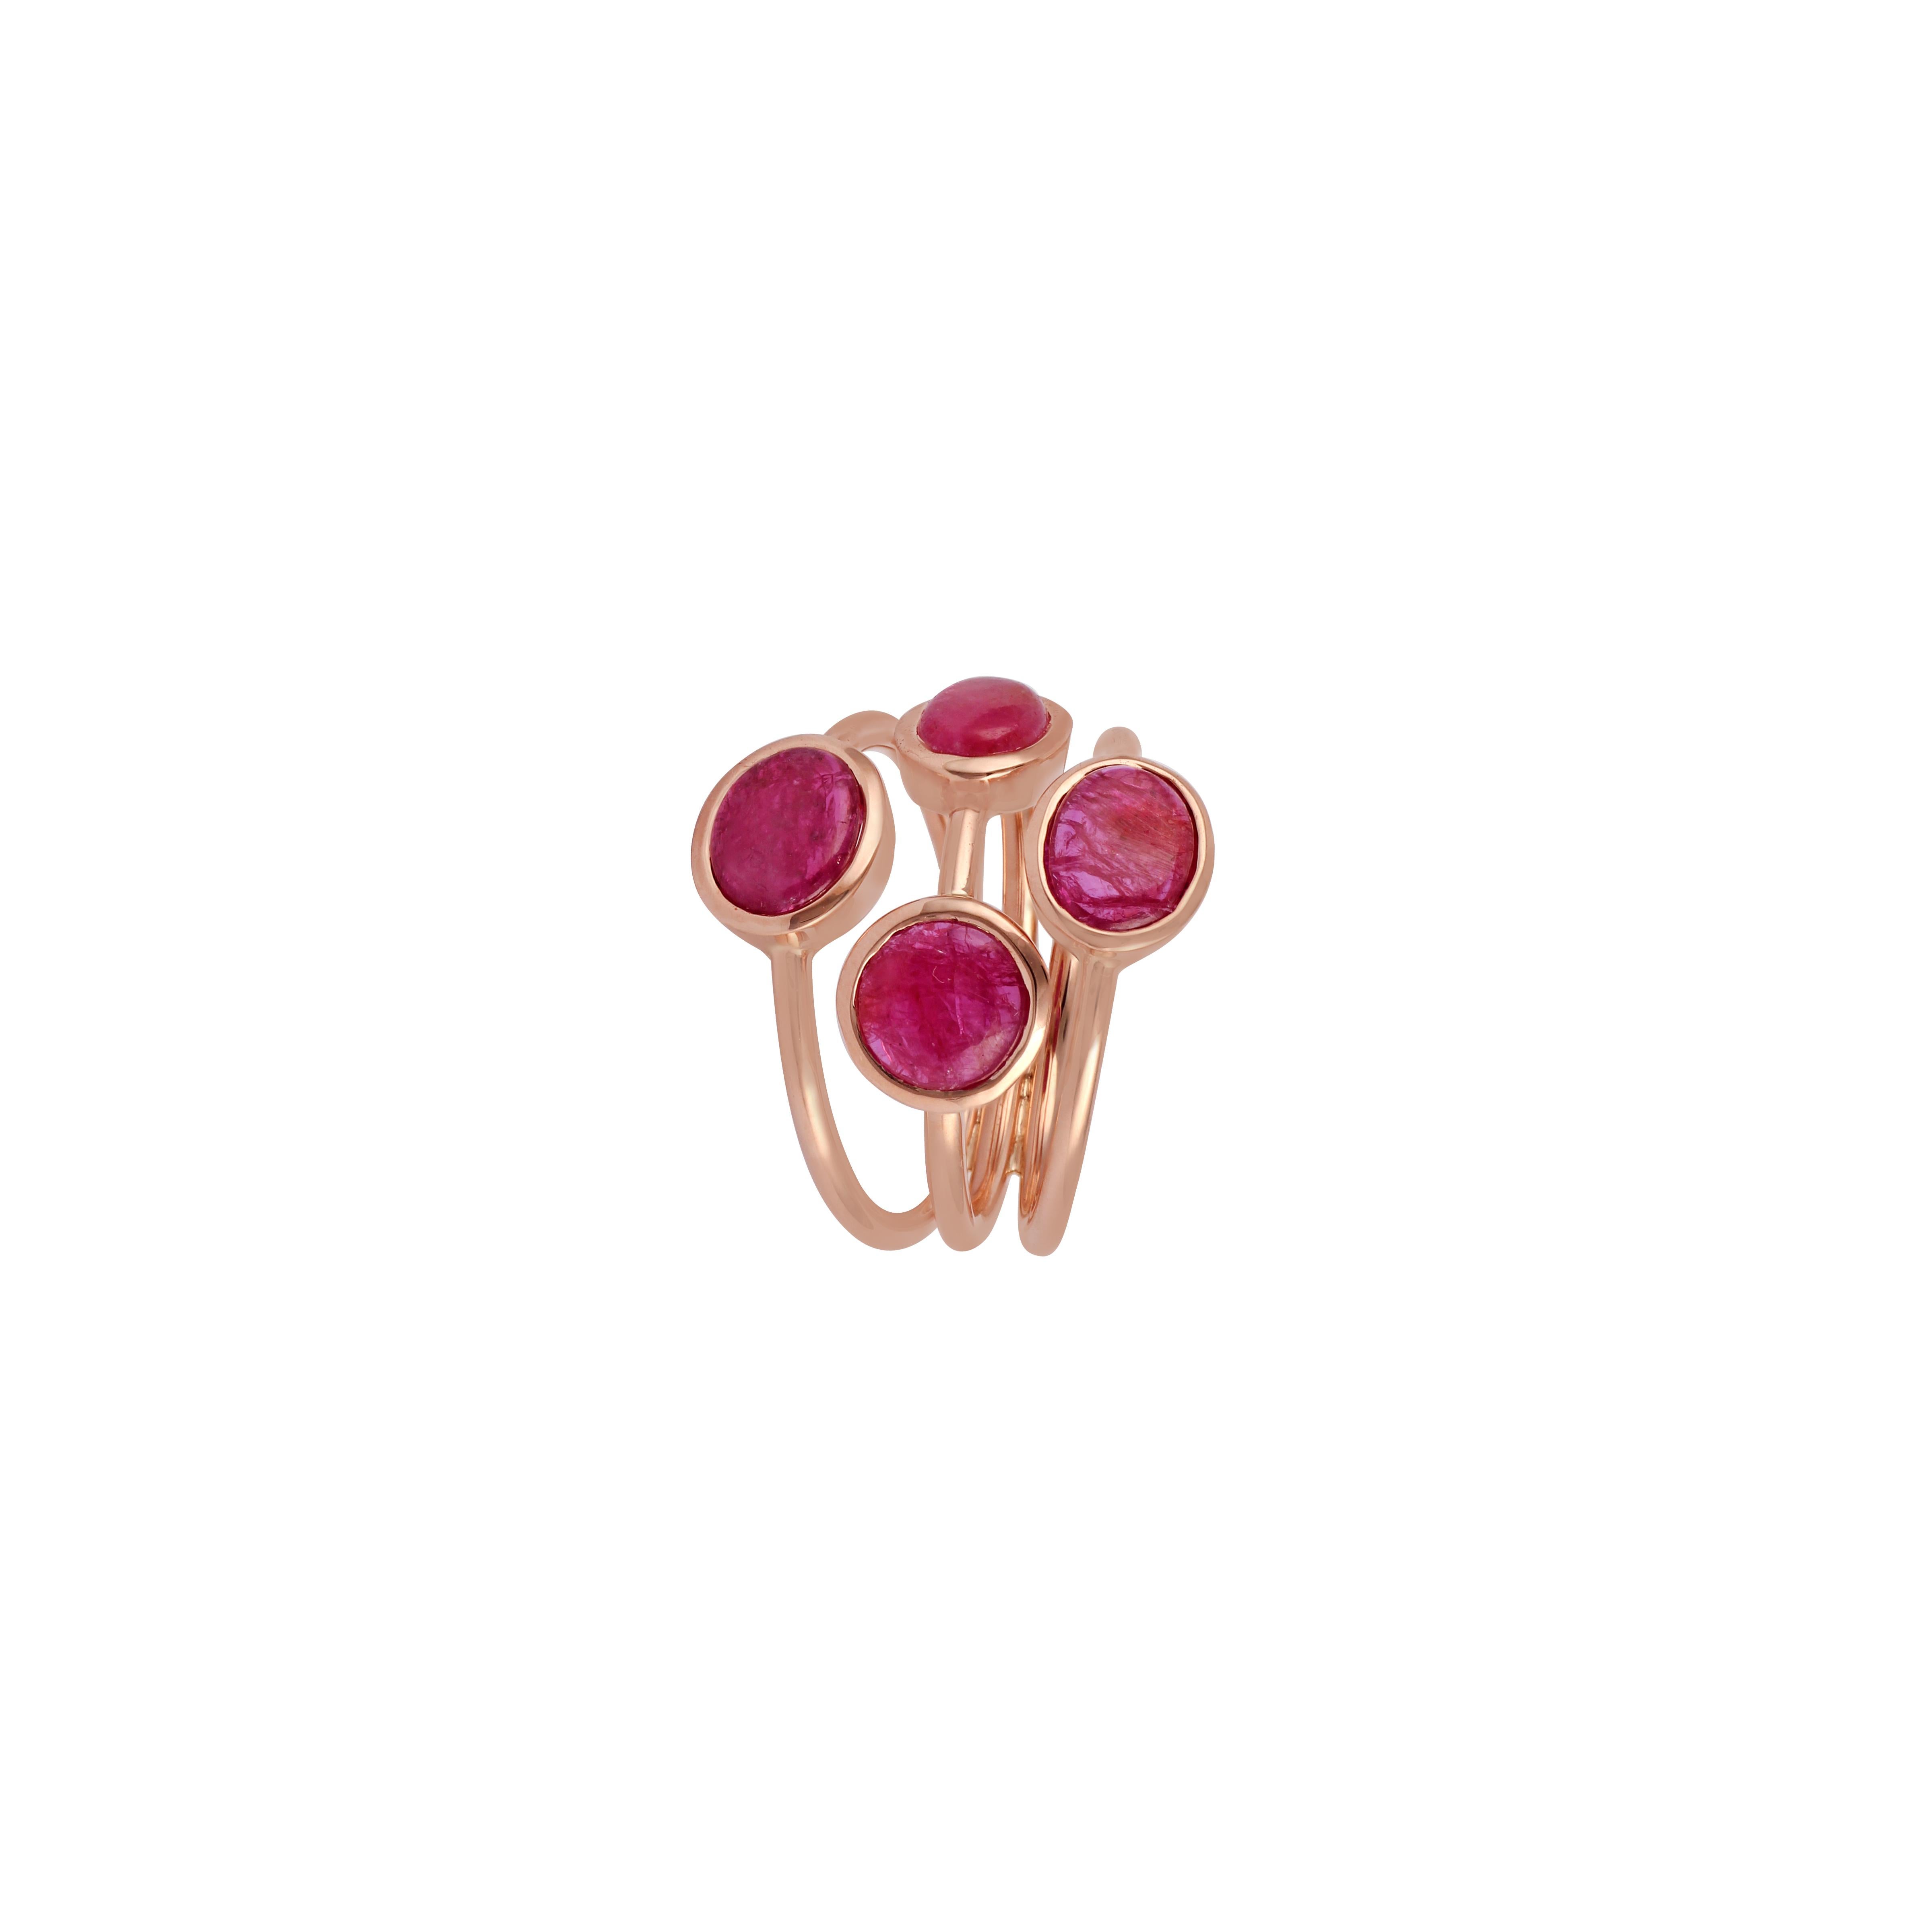 Cabochon Ruby Ring Studded in 18K Rose Gold